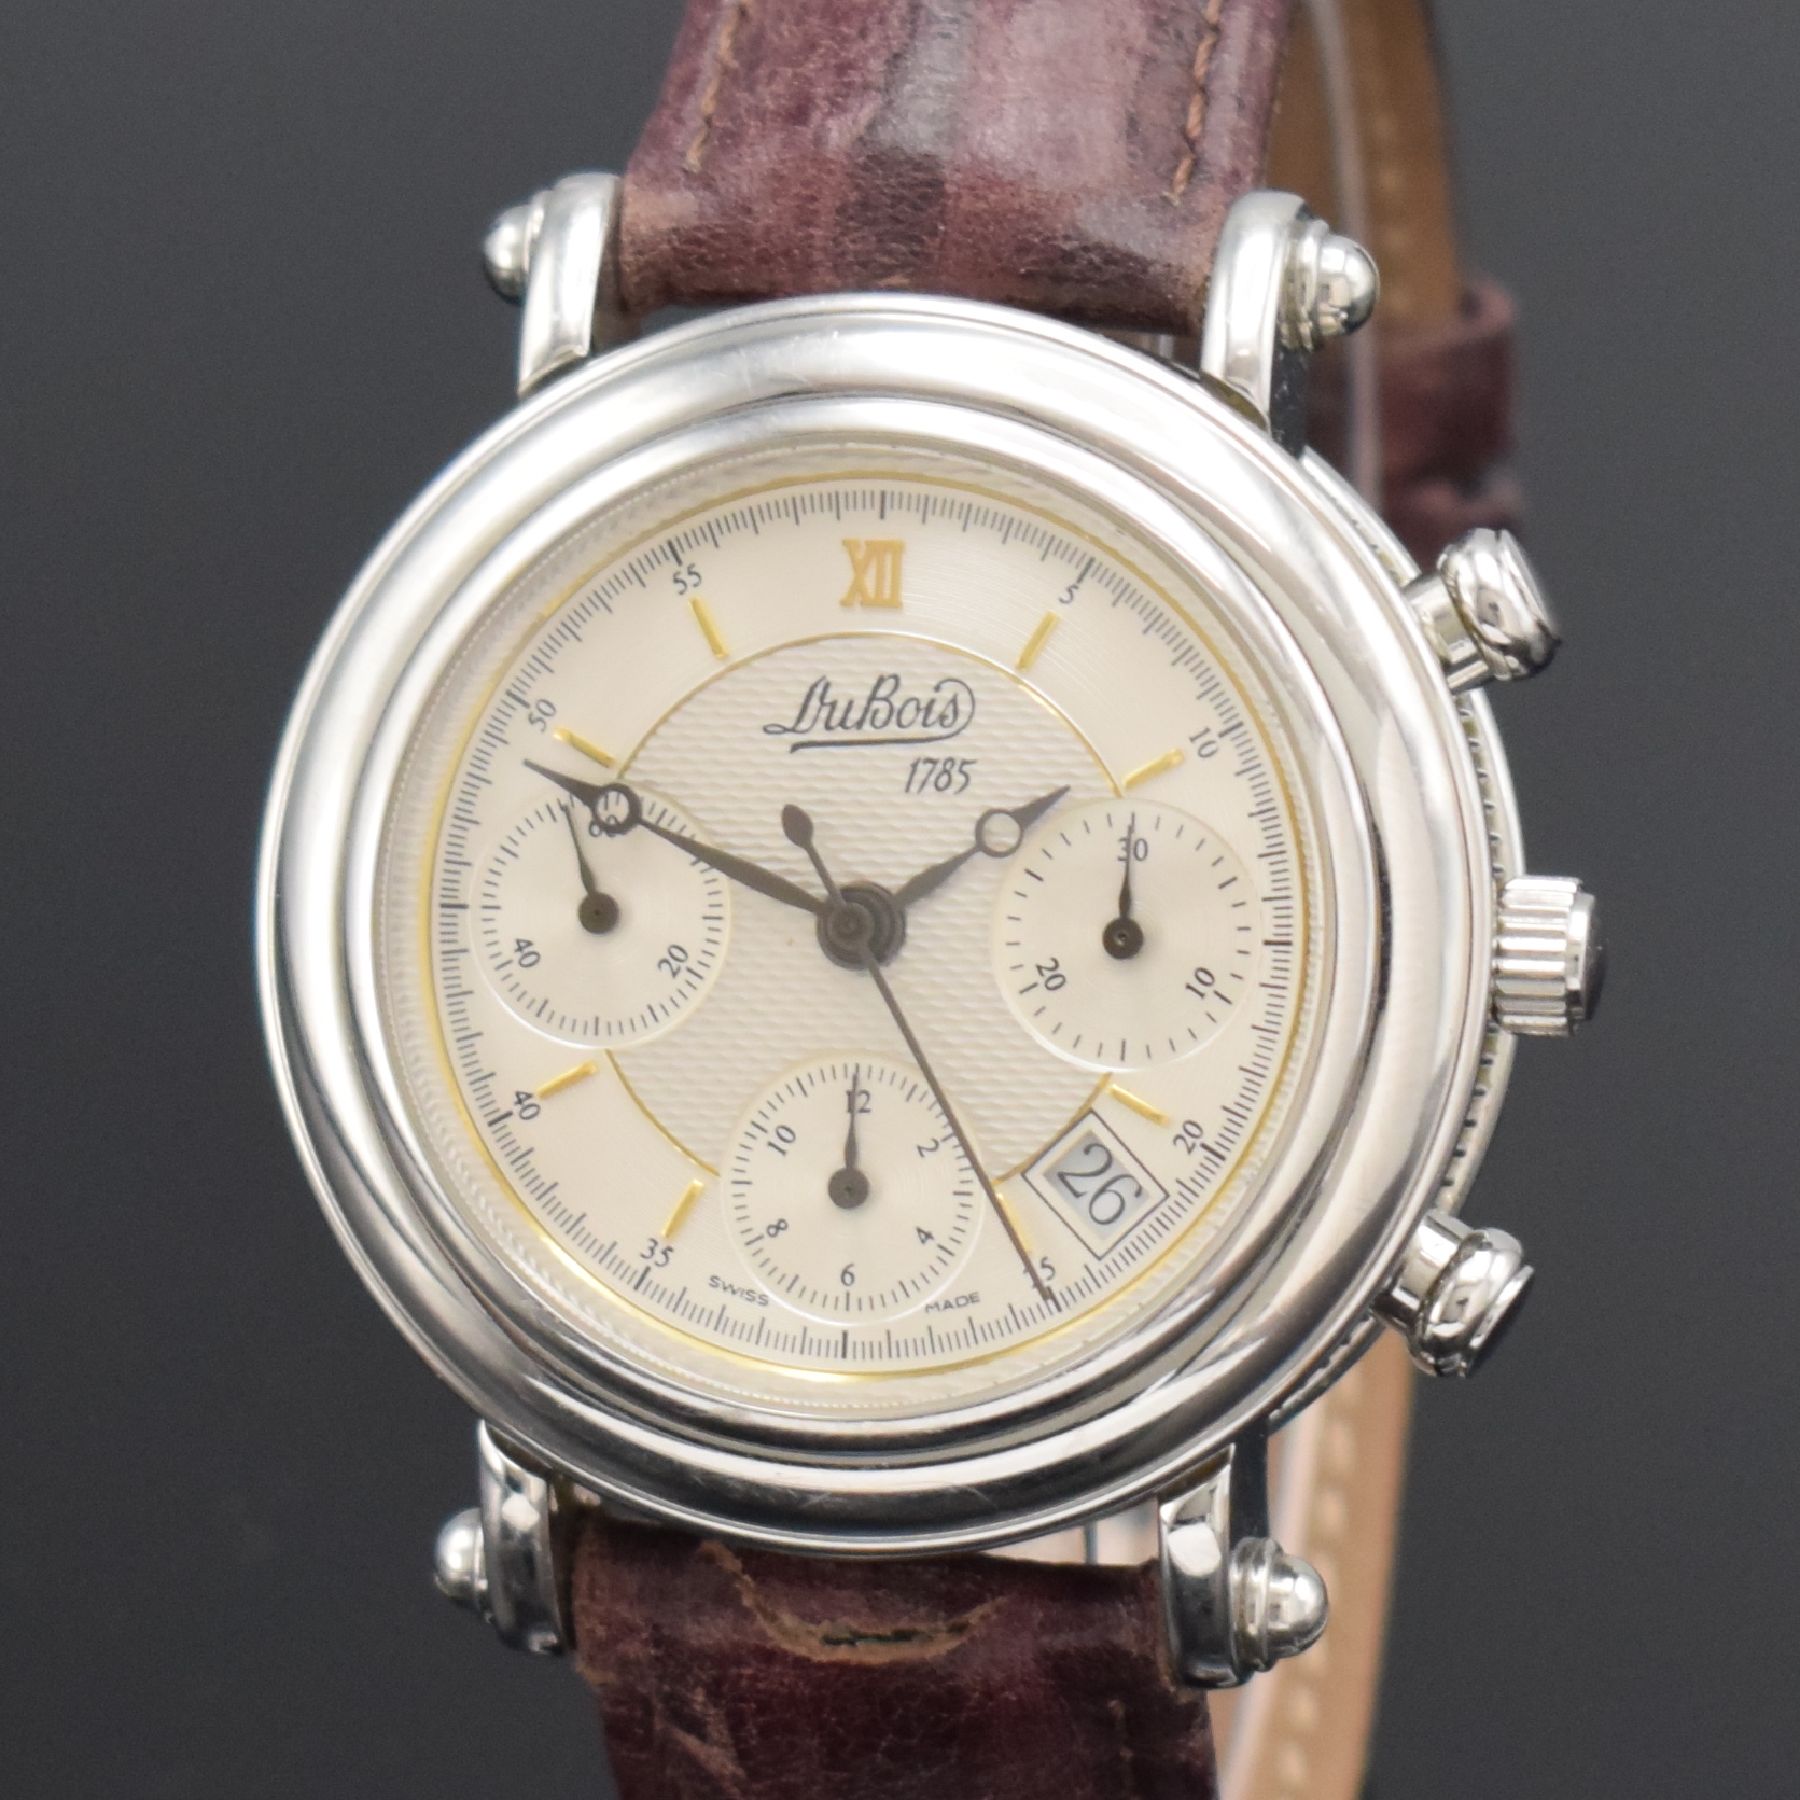 DuBOIS Montre Monnaie Herrenchronograph in - Image 4 of 6